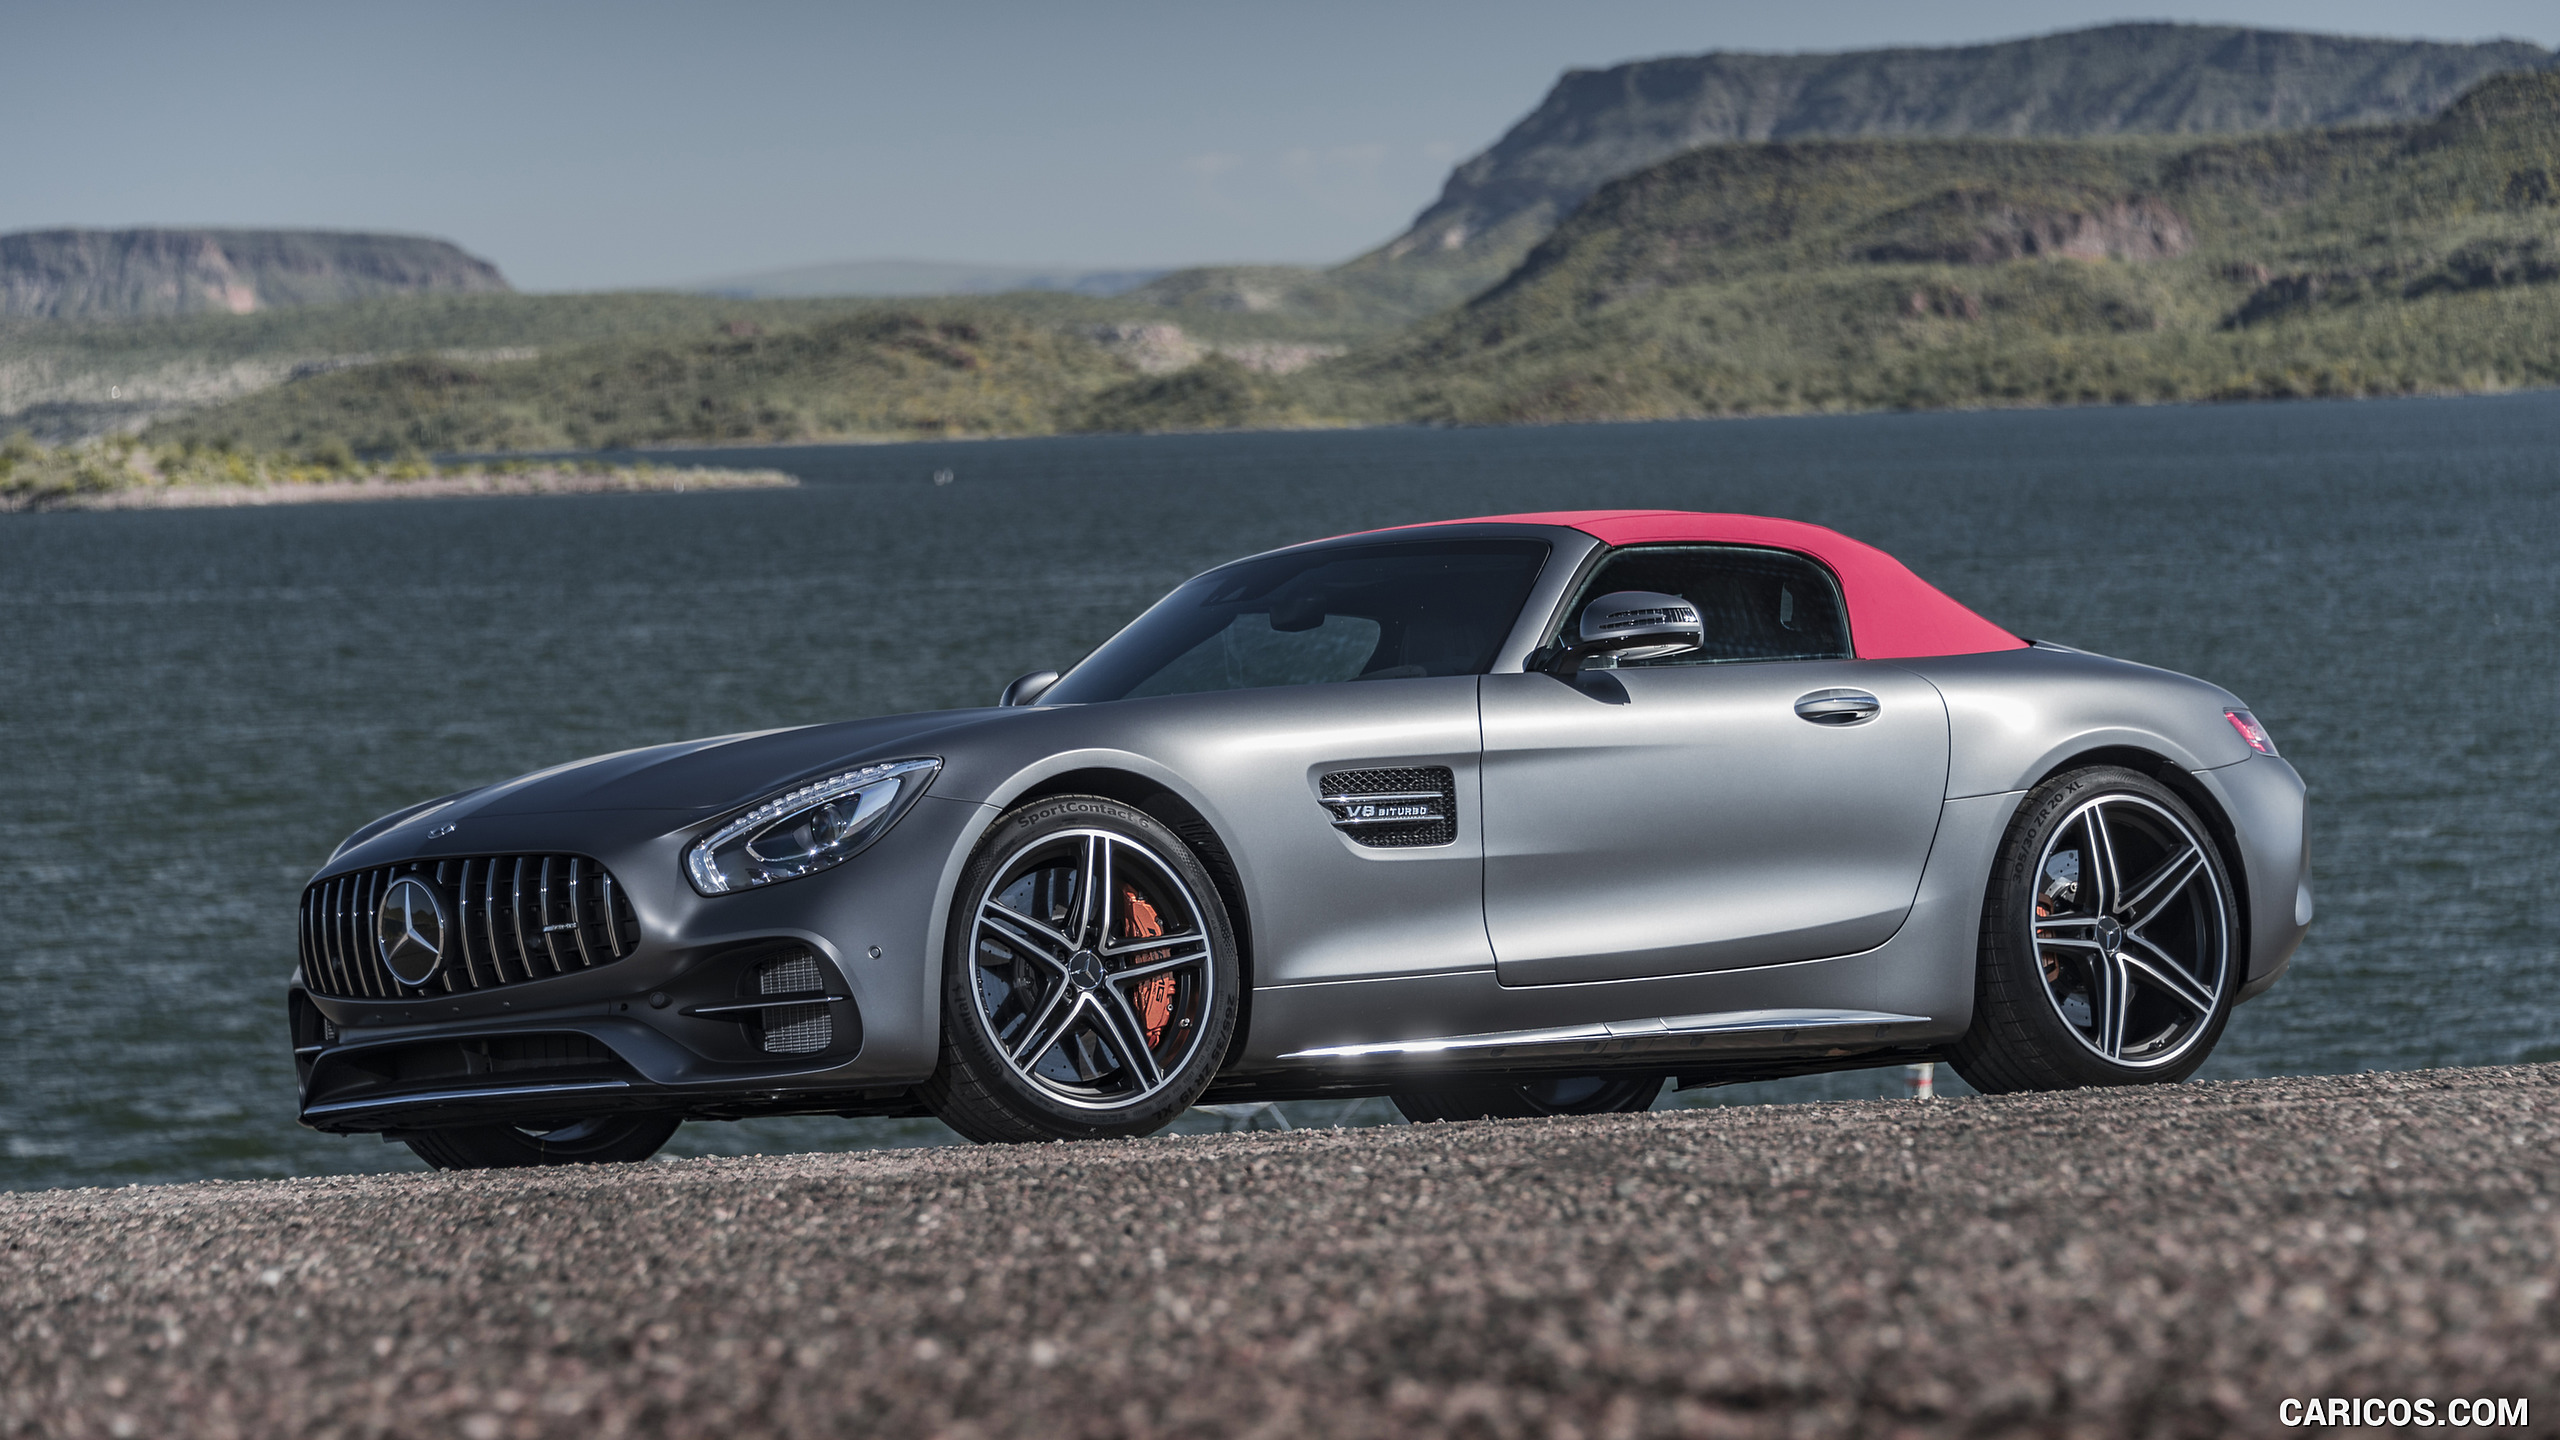 2018 Mercedes-AMG GT C Roadster - Front Three-Quarter, #304 of 350